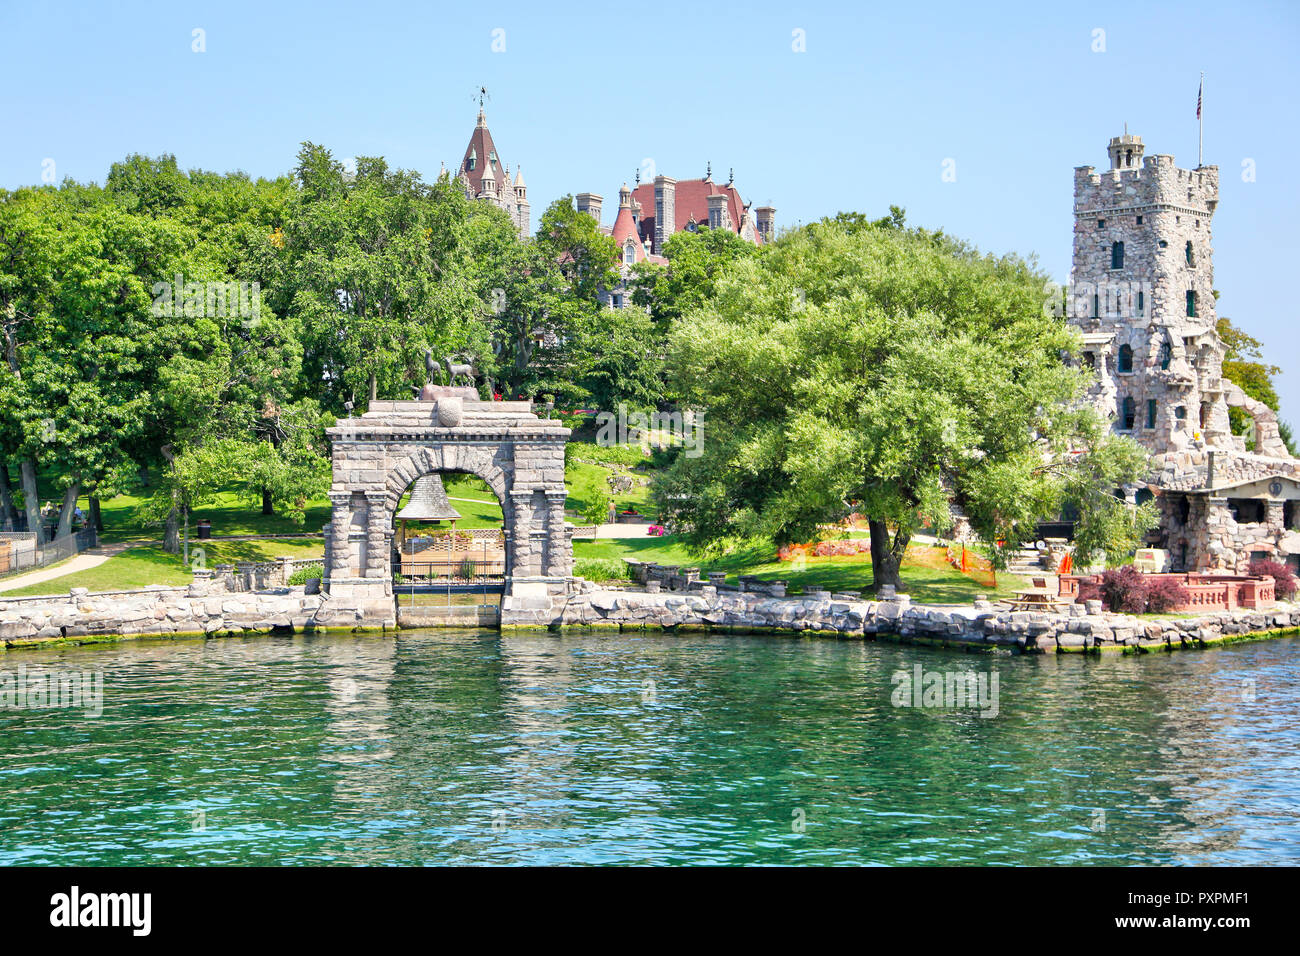 ALEXANDRIA, USA - August 24, 2012: Historic Boldt Castle in the 1000 Islands region of New York State on Heart Island in St. Lawrence River. In 1900,  Stock Photo